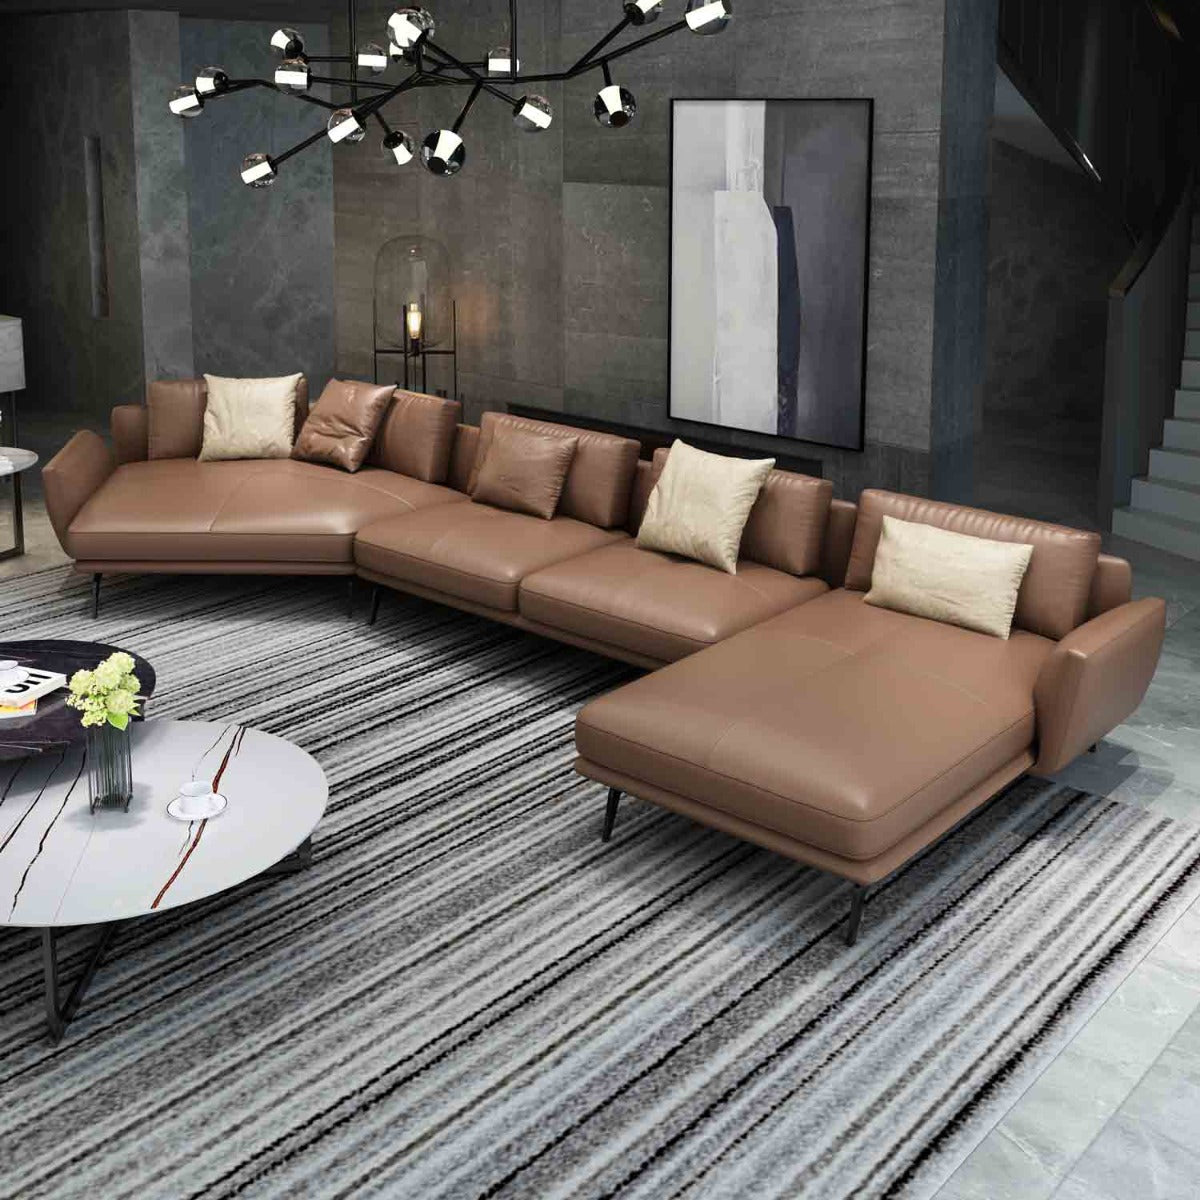 European Furniture - Santiago Sectional in Russet Brown Leather - 83540R-3RHF - New Star Living